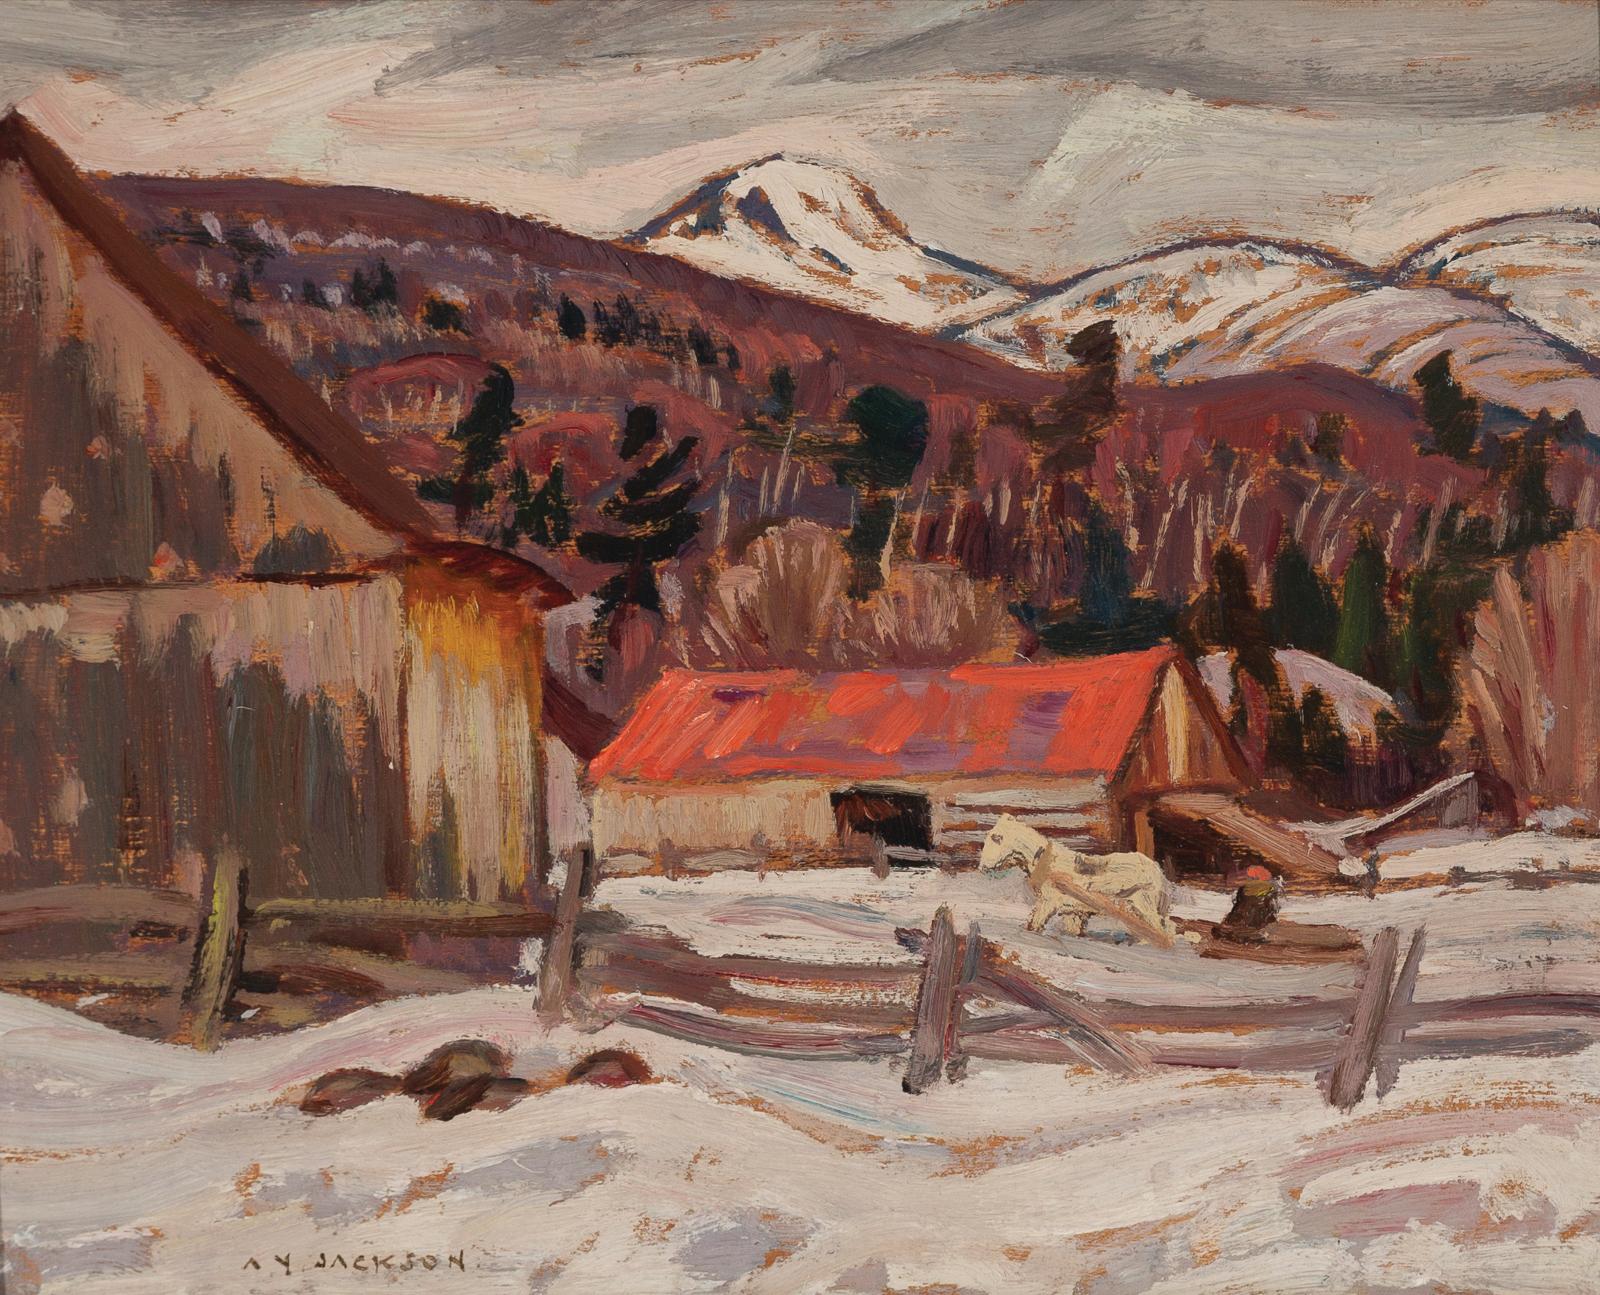 Alexander Young (A. Y.) Jackson (1882-1974) - The Red Barn, C.1930